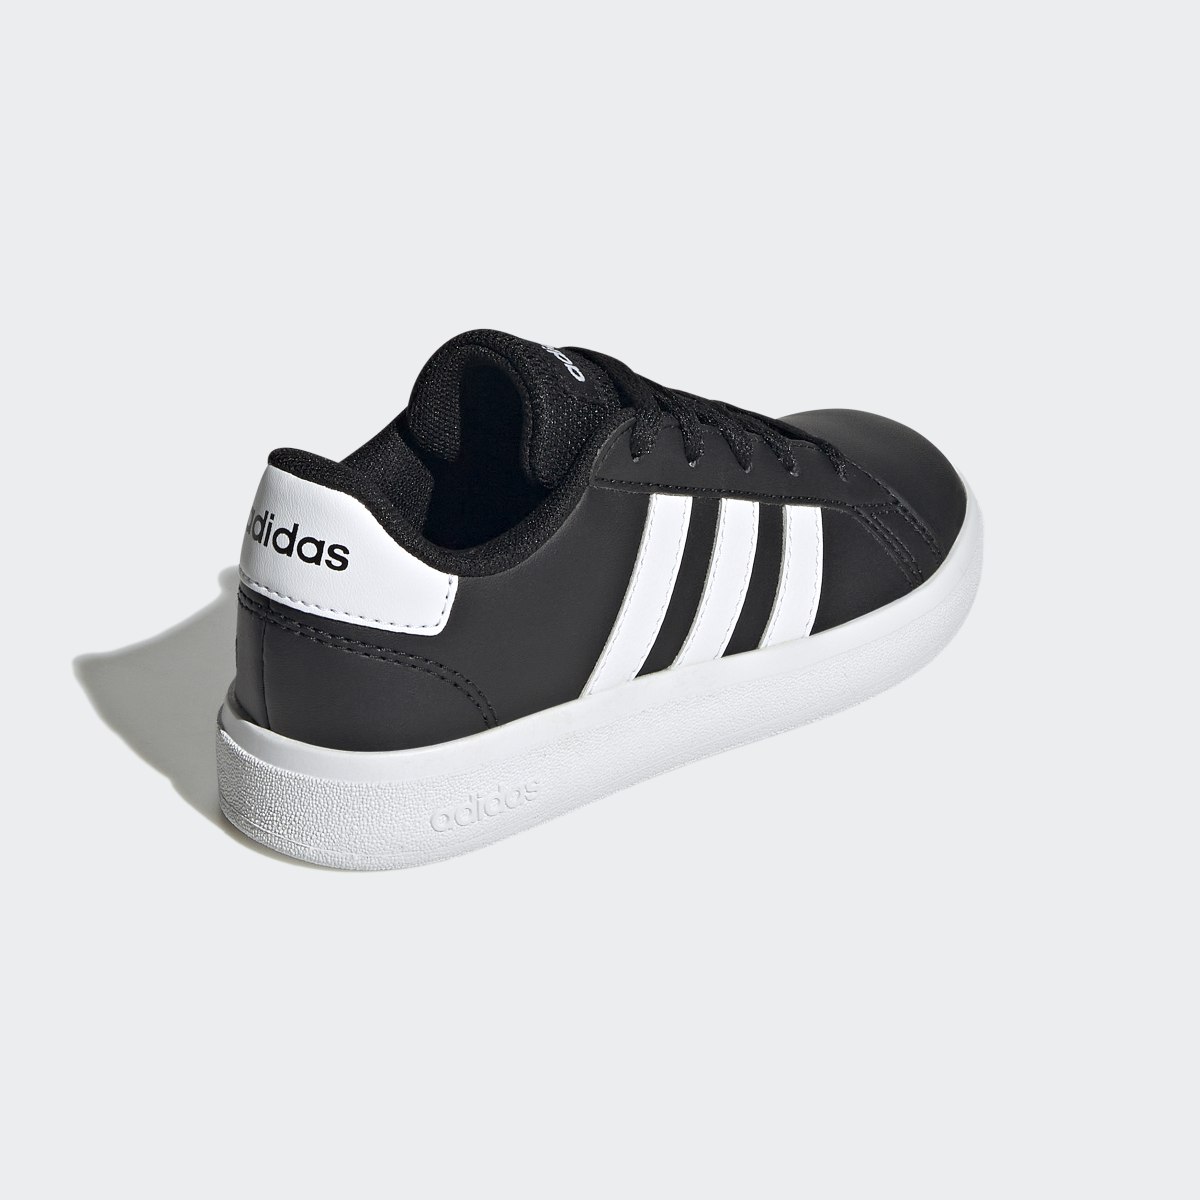 Adidas Grand Court Lace-Up Shoes. 6